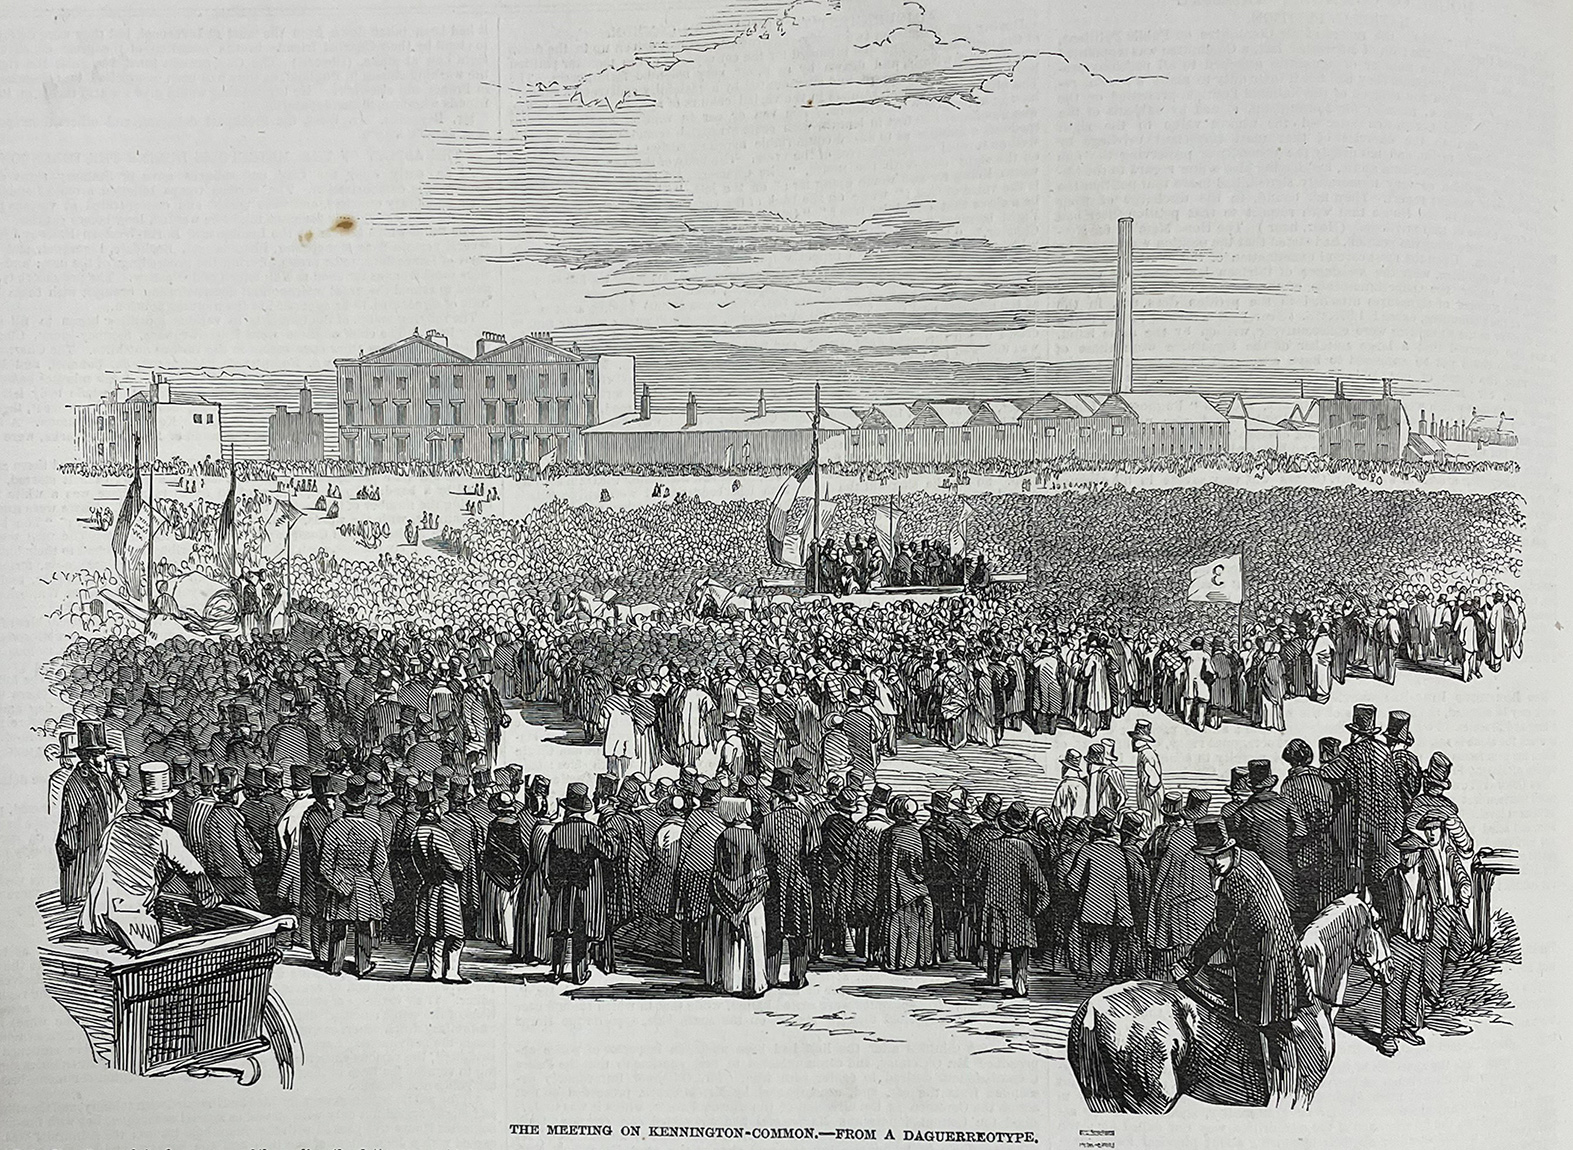 Image caption reads: The meeting on Kennington Common-from a Daguerreotype’. Crowd of people with men in top hats in large open ground with building with large chimney in background. Platform with flags and people standing in centre. Man on horse in foreground.